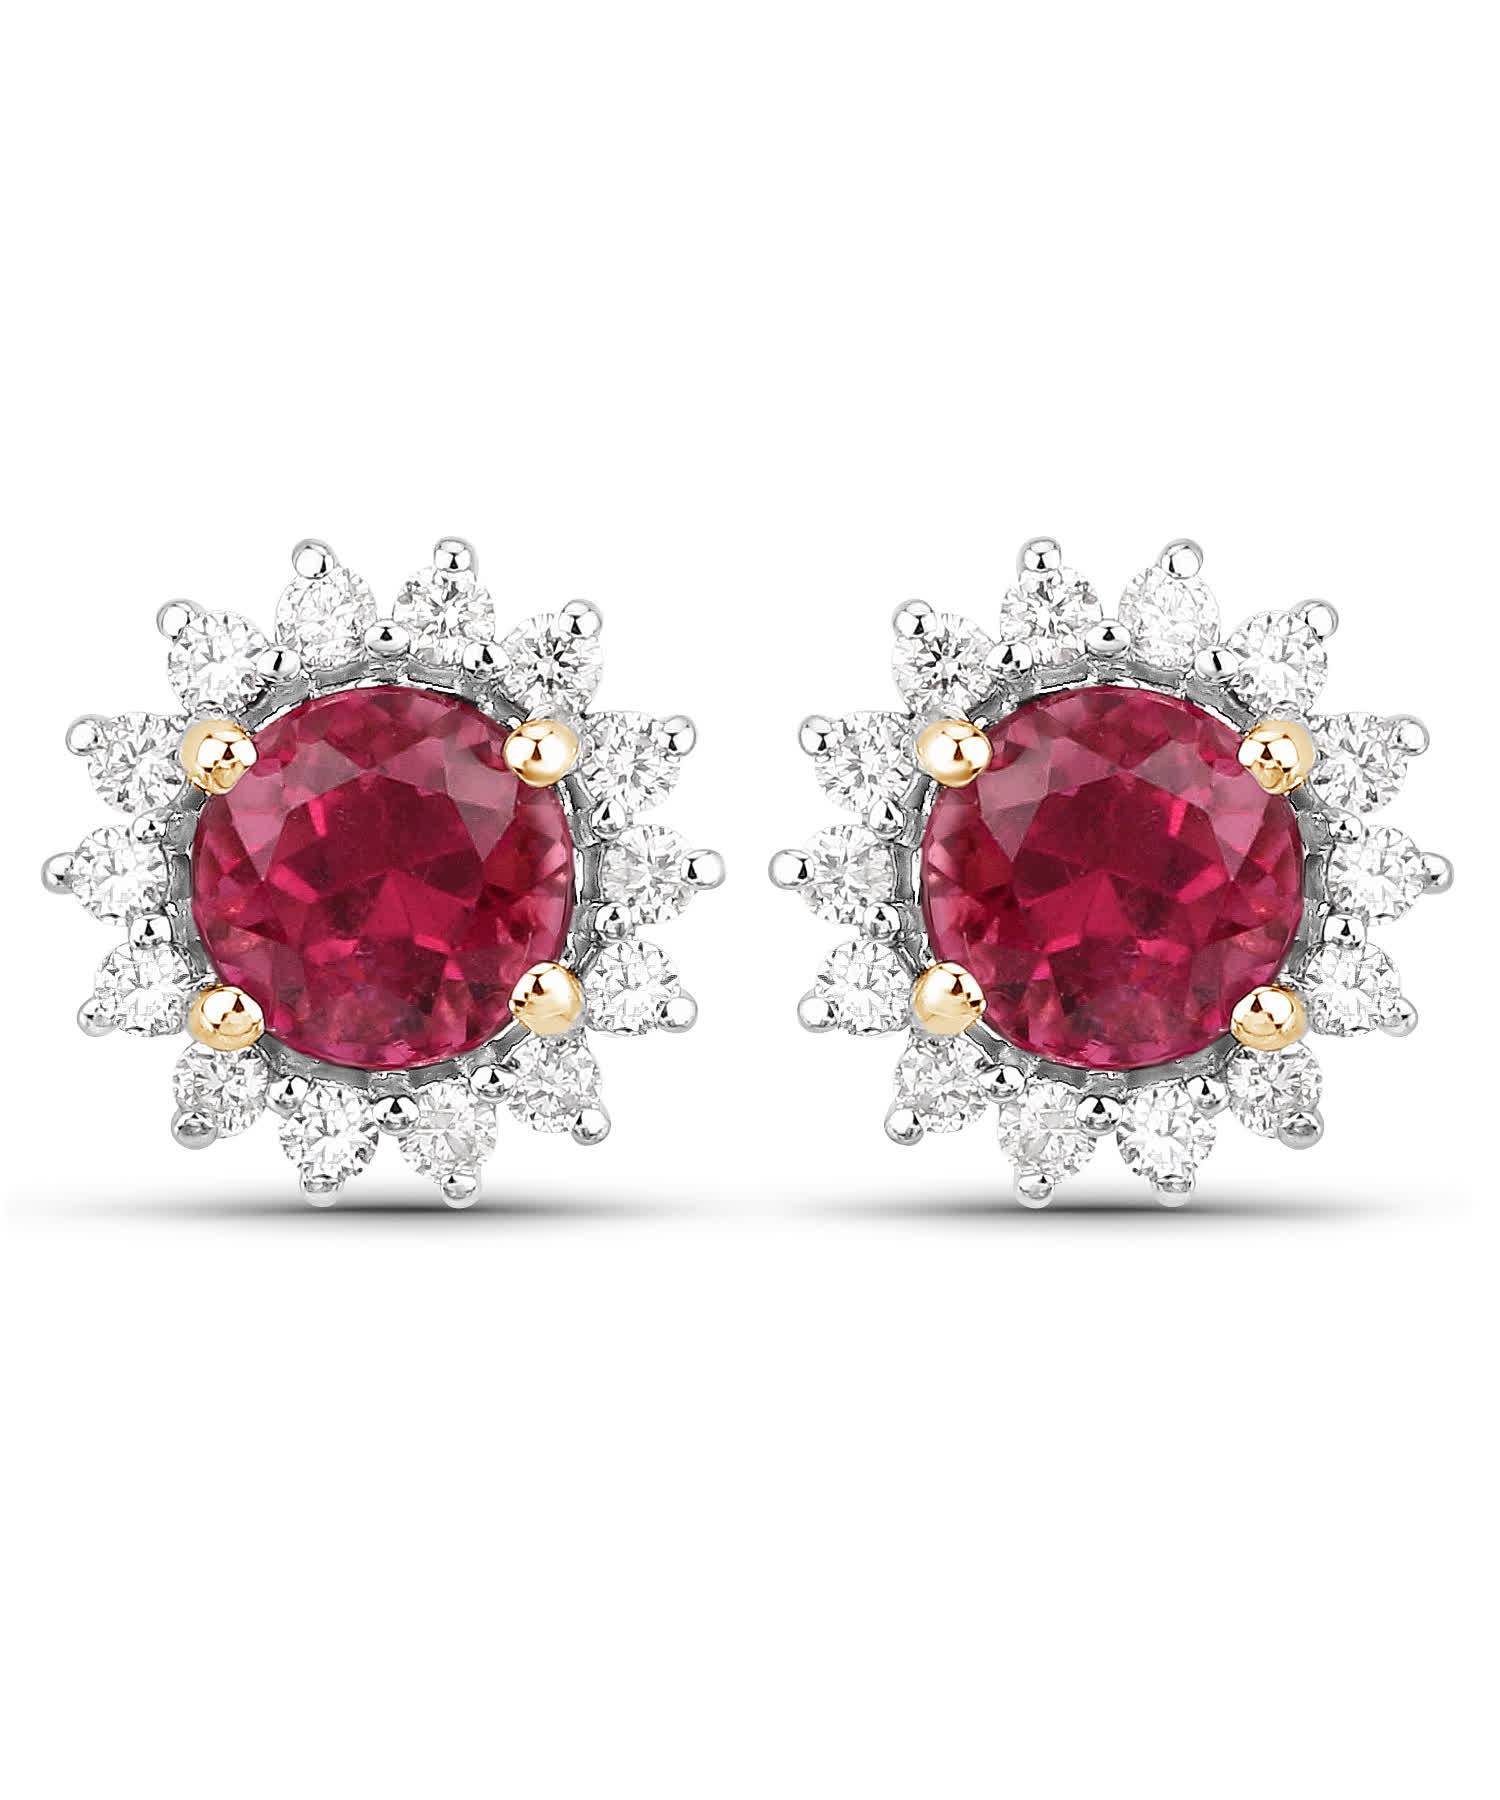 1.24ctw Natural Rubellite and Diamond 14k Gold Flower Stud Earrings View 1